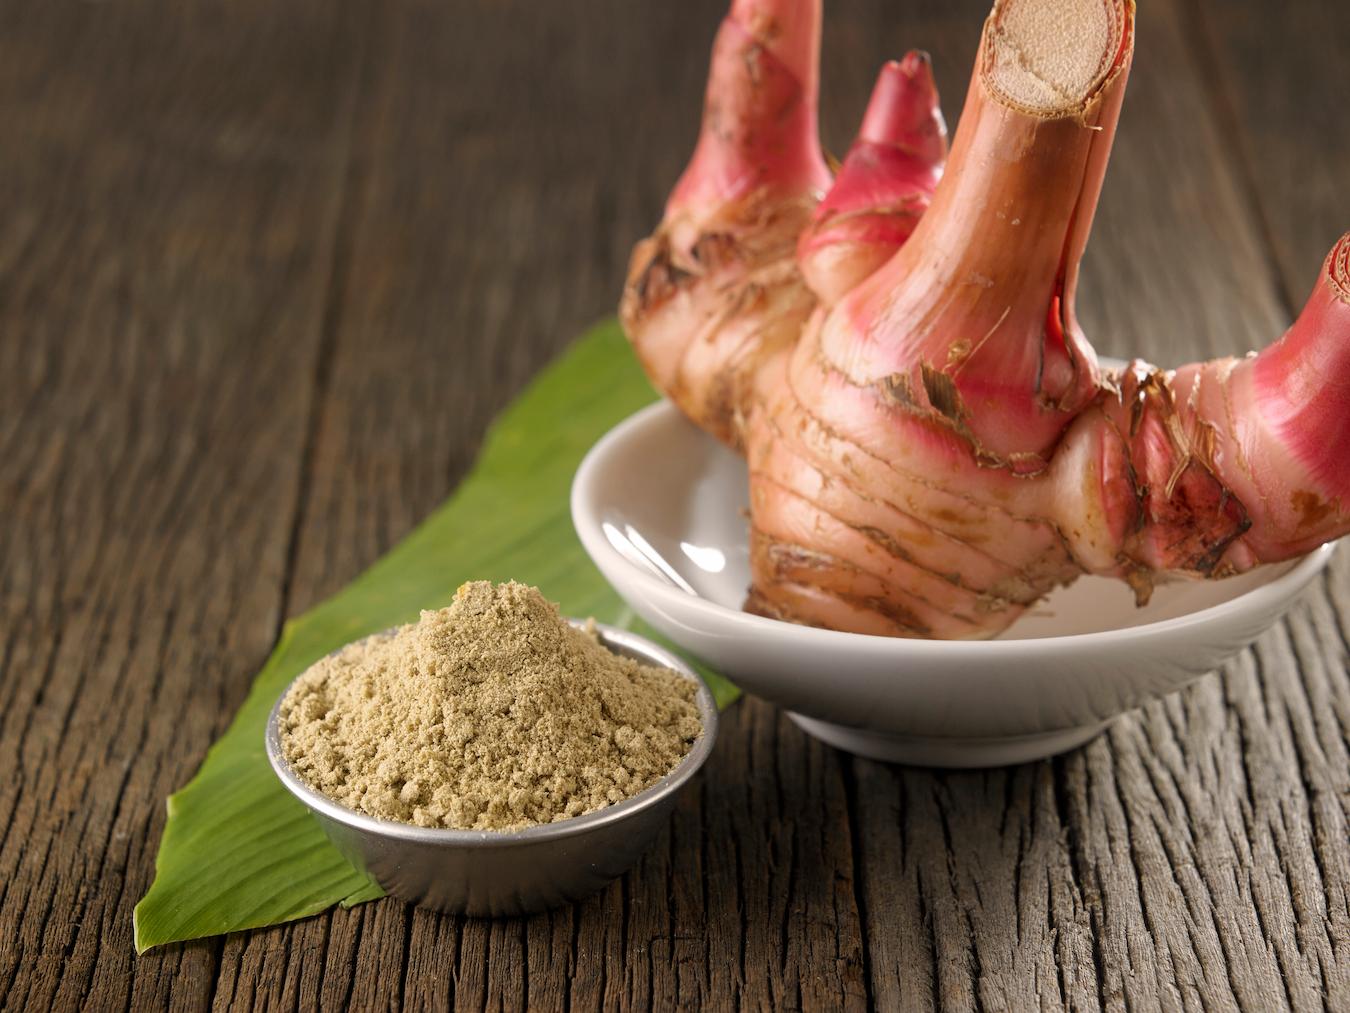 galangal powdered form and whole roots fresh ginger called Chinese ginger family peppery bite sand ginger siamese ginger find fresh galangal powder lesser galangal closely related sliced flavor roots sliced common usage